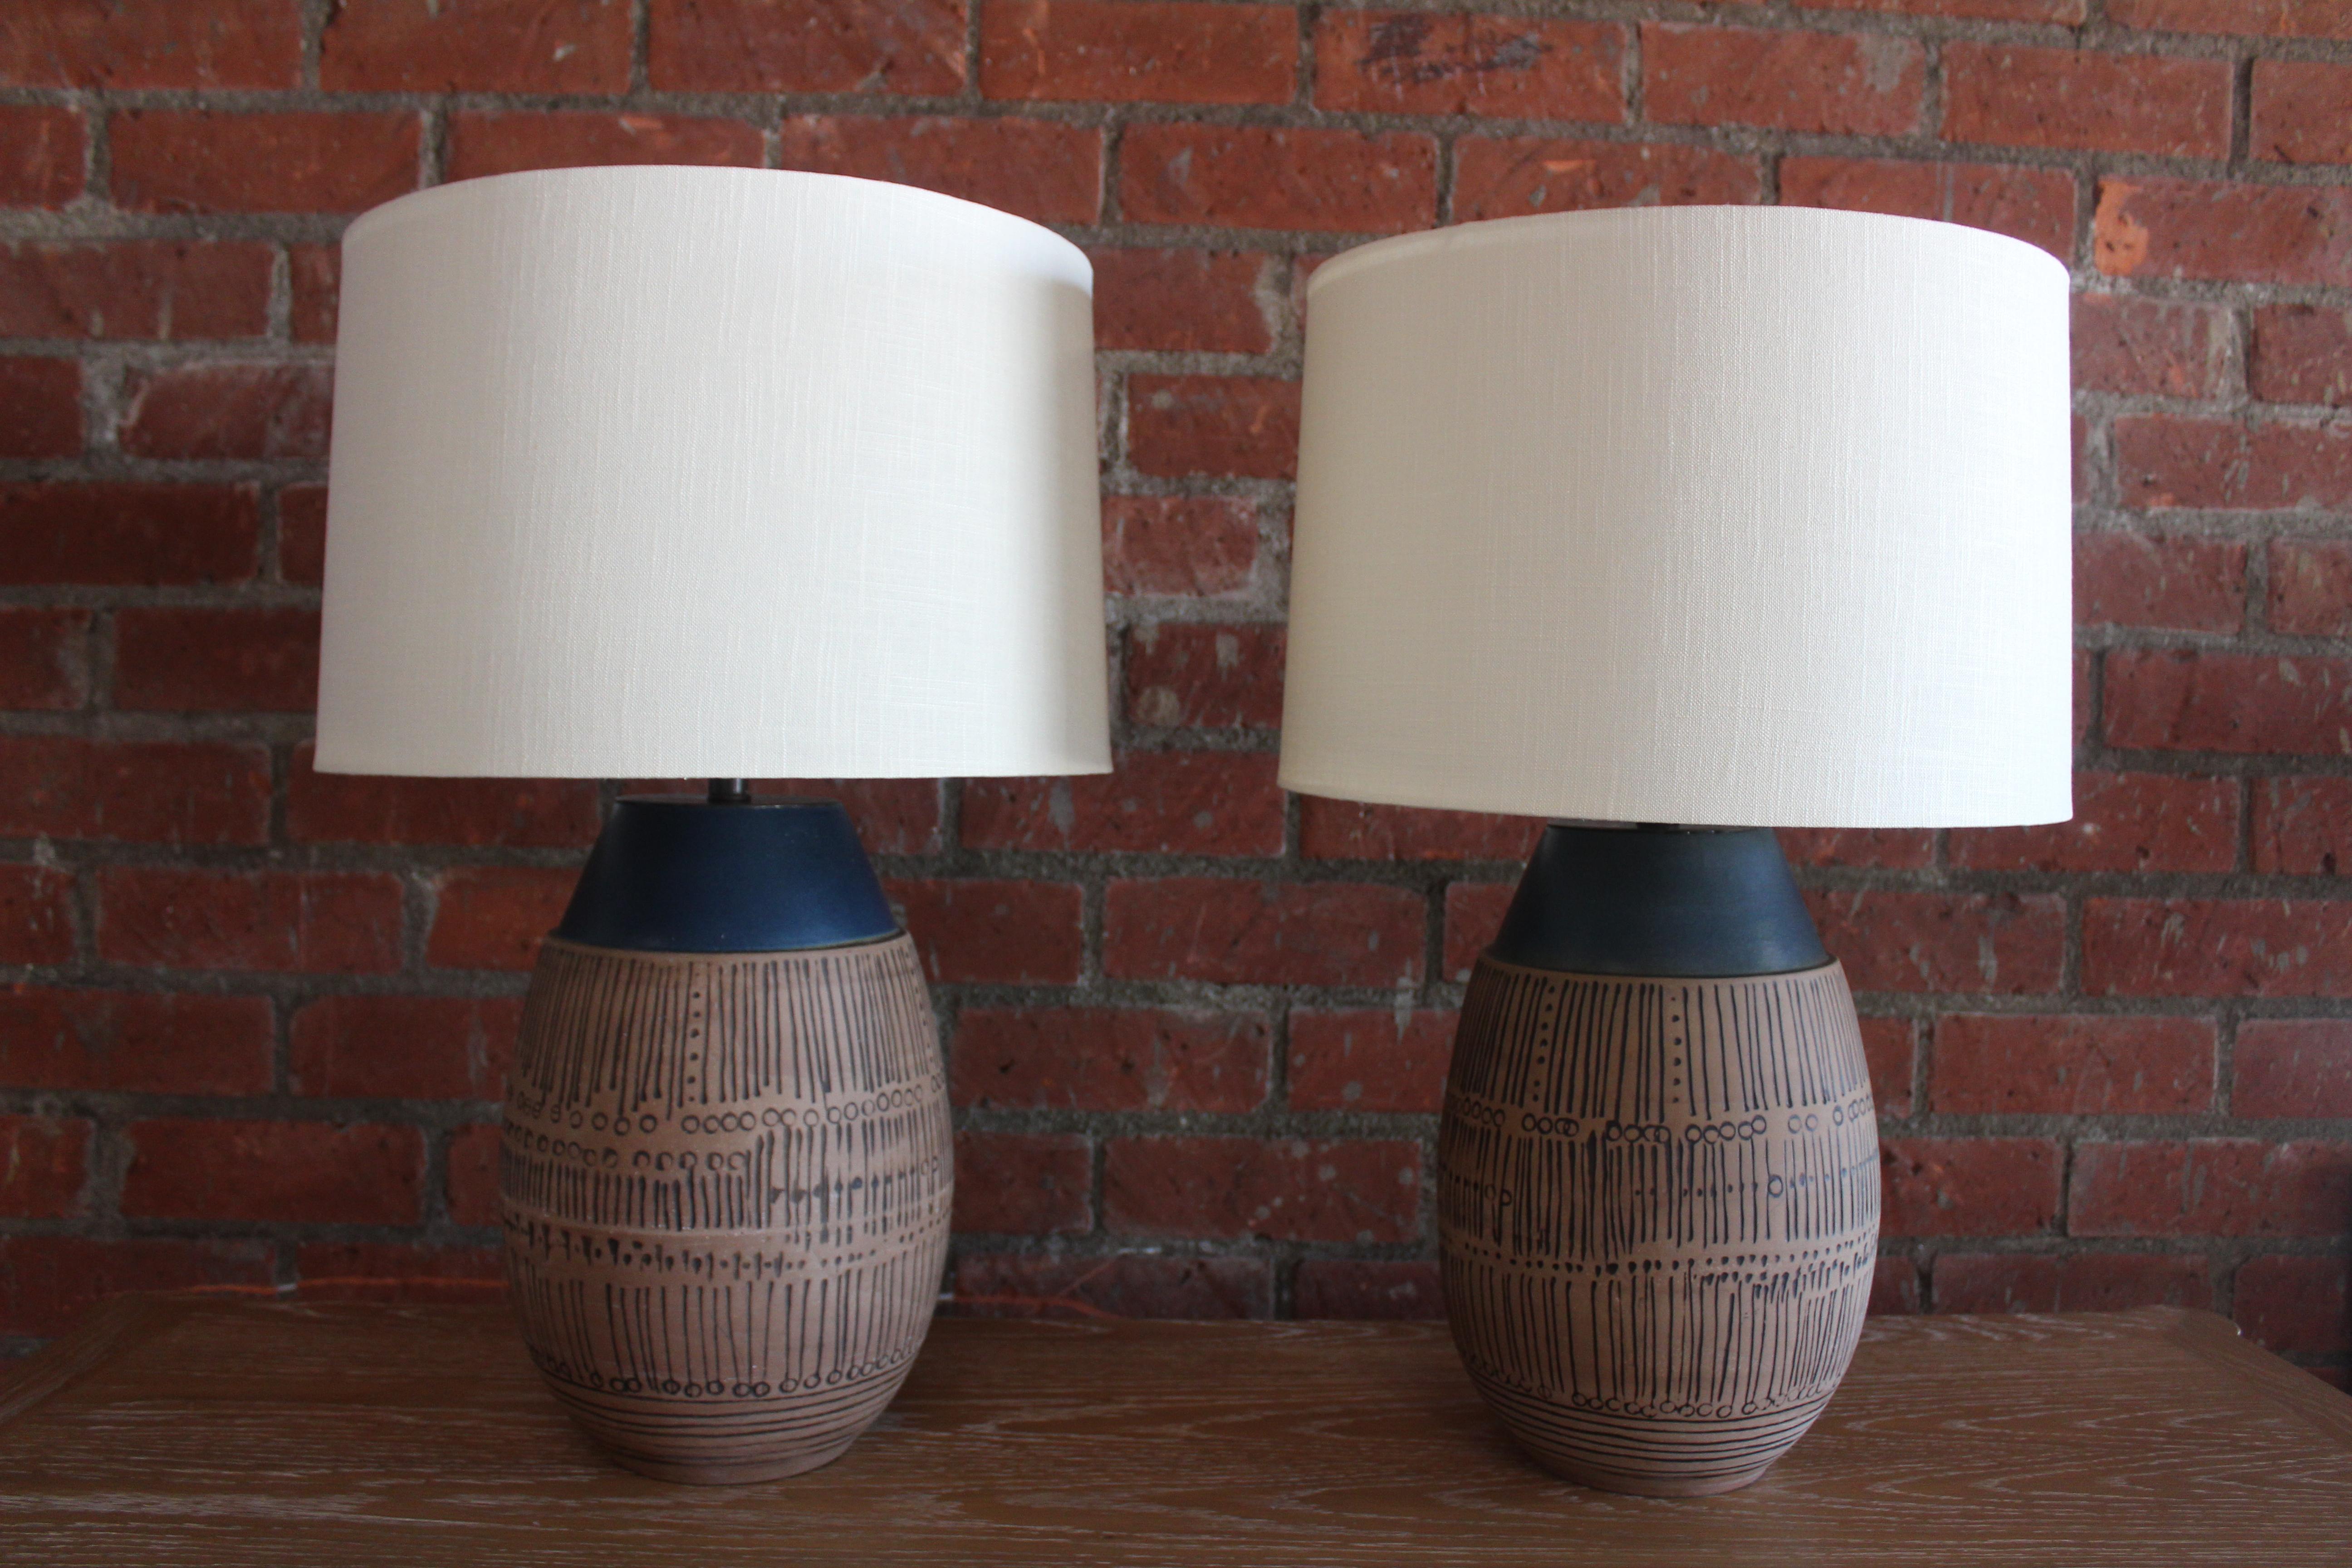 Pair of vintage 1960s chamotte stoneware table lamps by Lisa Larsen, Sweden. The pair have been recently rewired and fitted with custom shades made of Belgian linen. They are 26.5 high with shades and have a 11